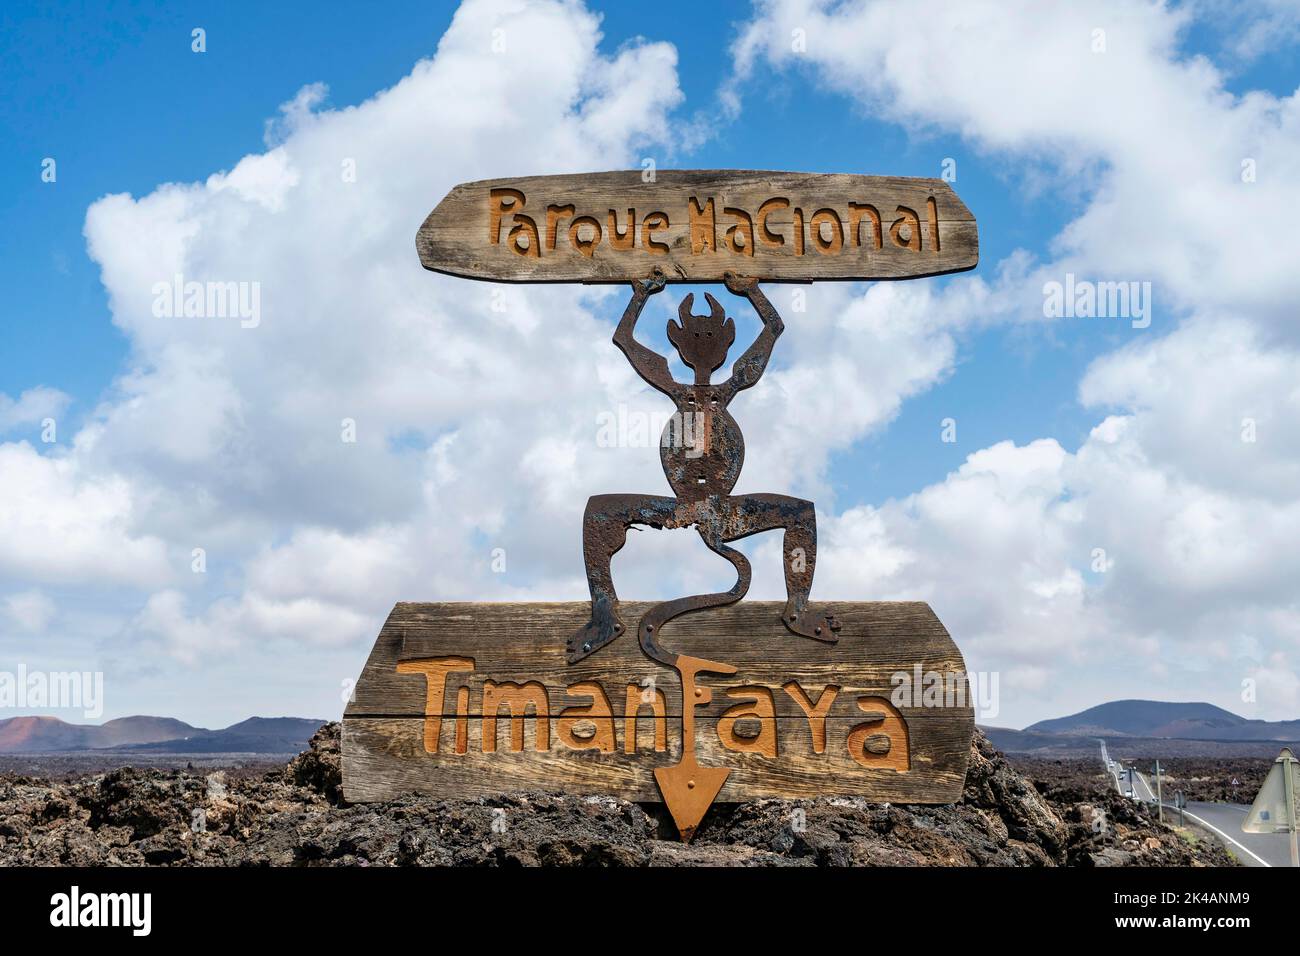 Timanfaya National Park sign on volcanic black rocks in Lanzarote, Canary Islands, Spain Stock Photo